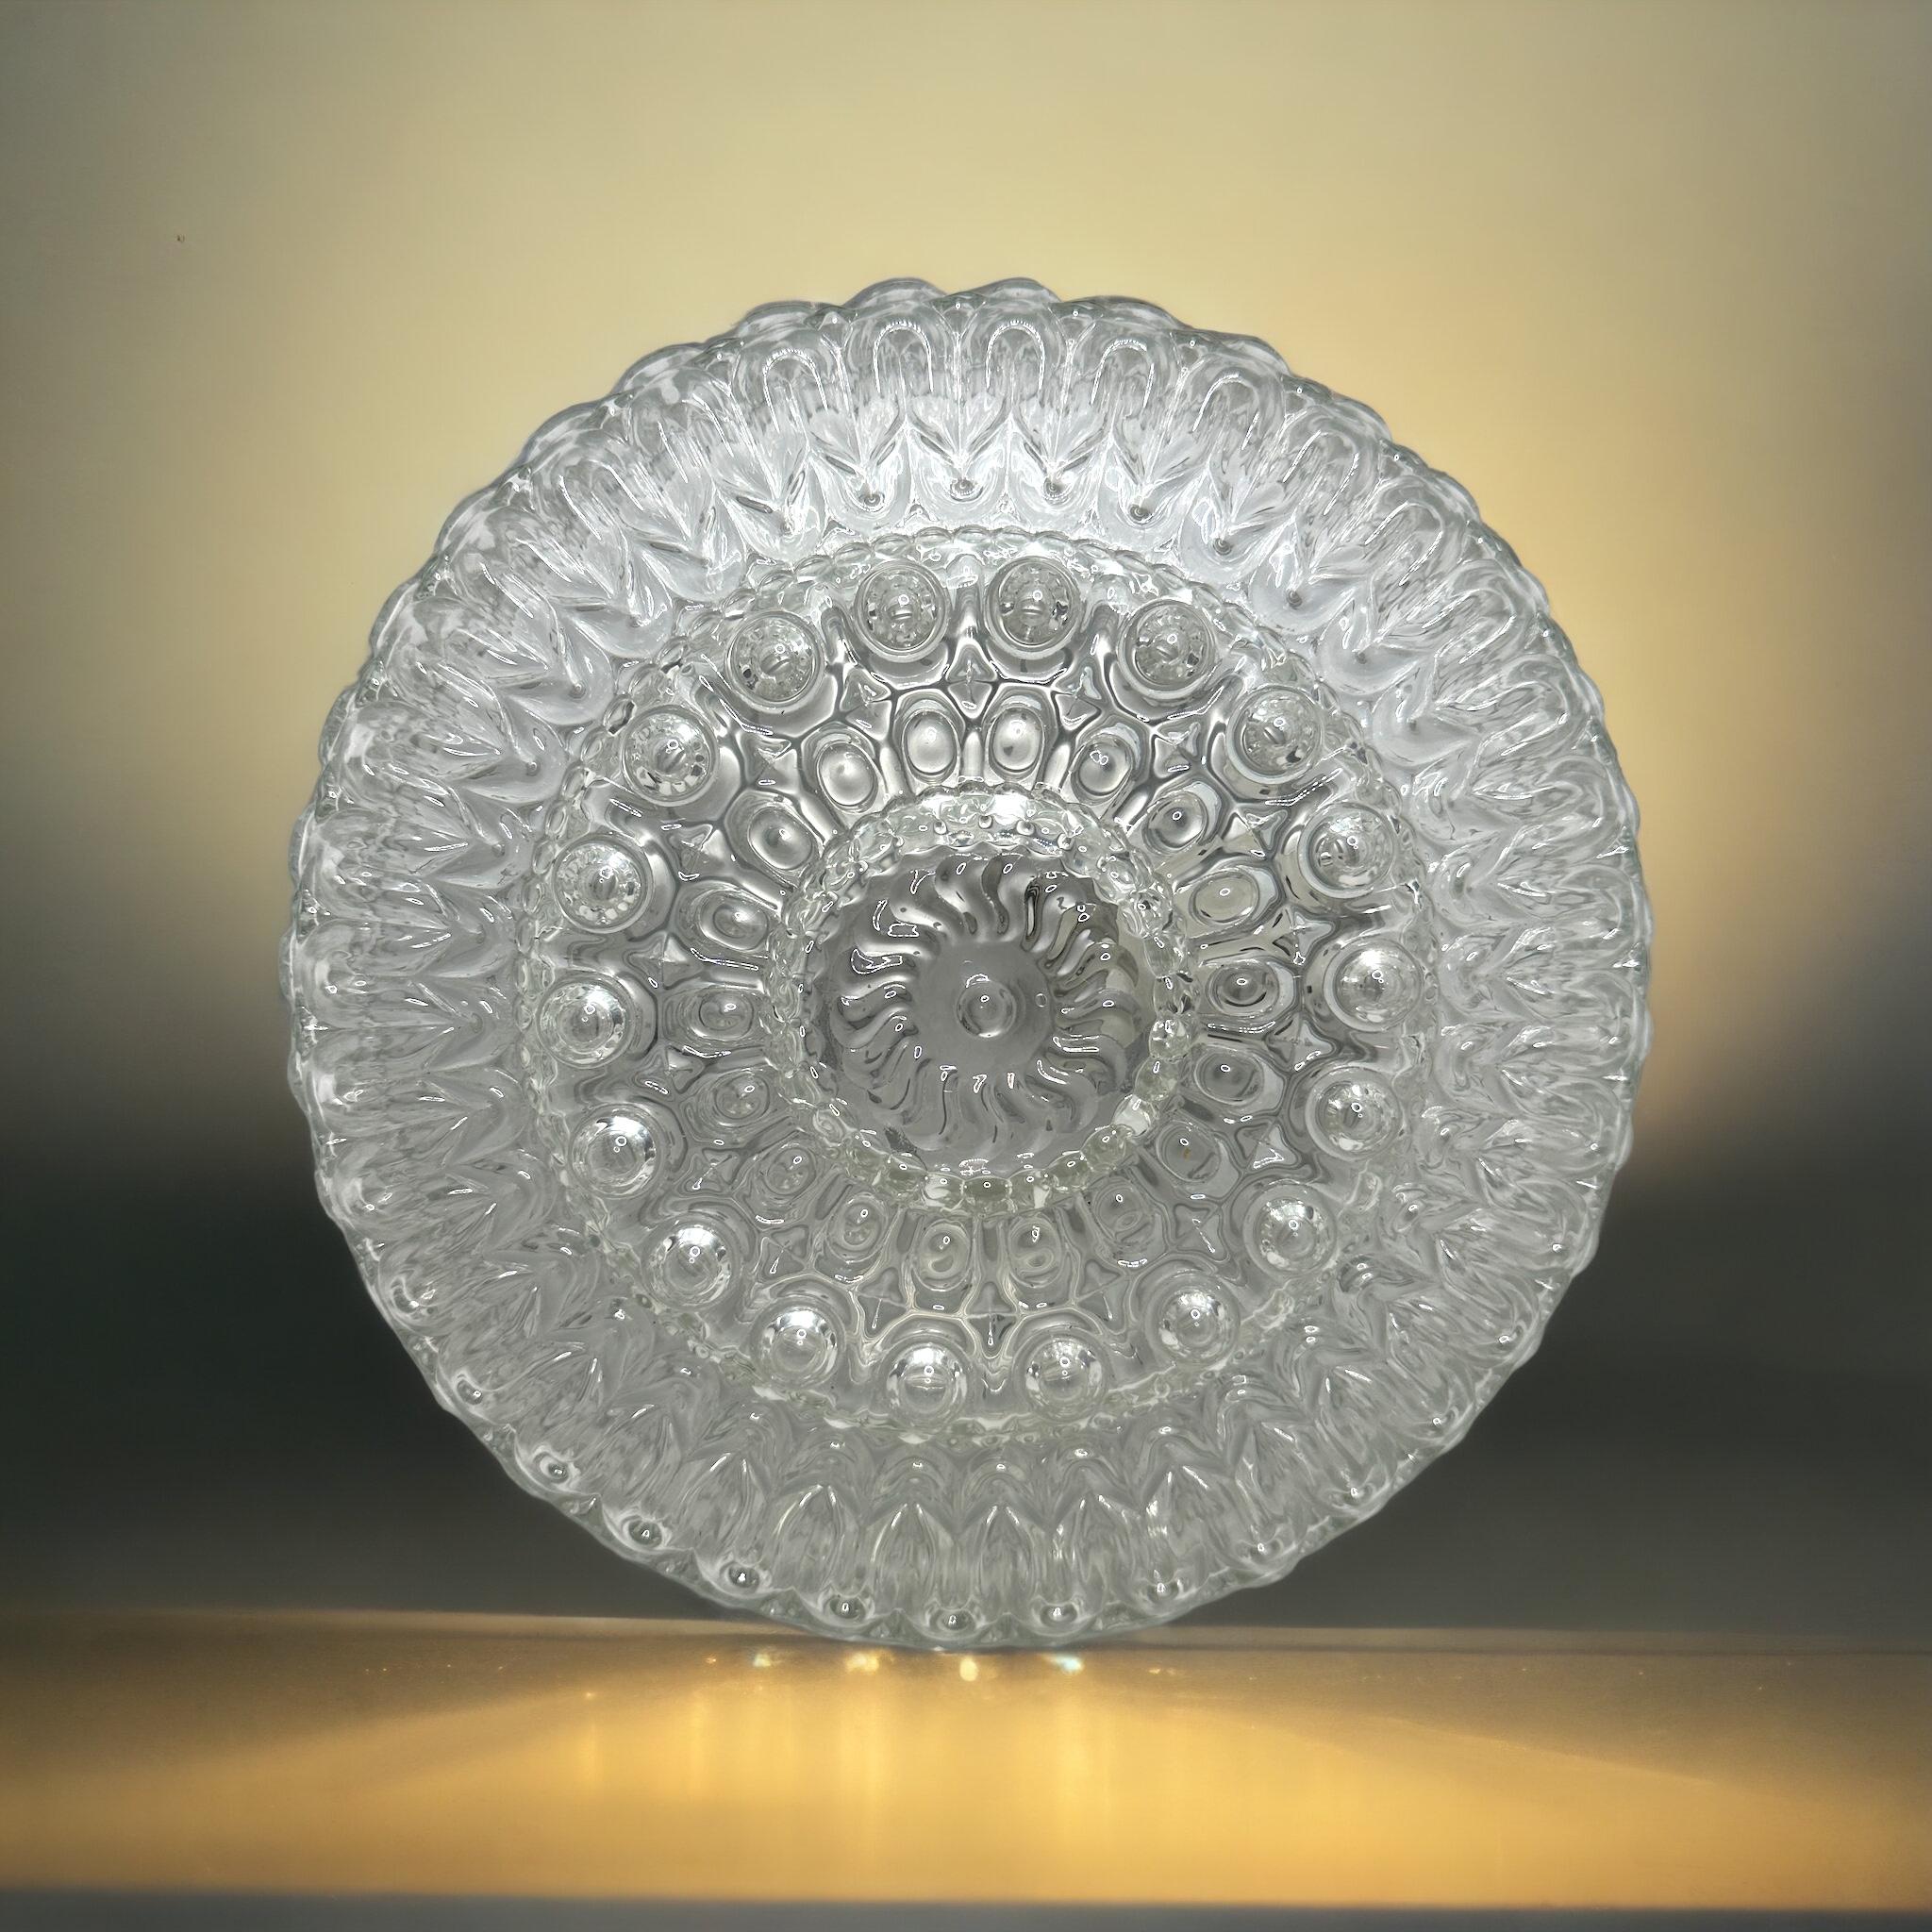 Beautiful bubble glass pattern flush mount. Made in Germany by Massive Leuchten. Gorgeous textured glass flush mount with metal fixture. The fixture requires one European E27 Edison or Medium bulb up to 60 watts. A nice addition to any room.